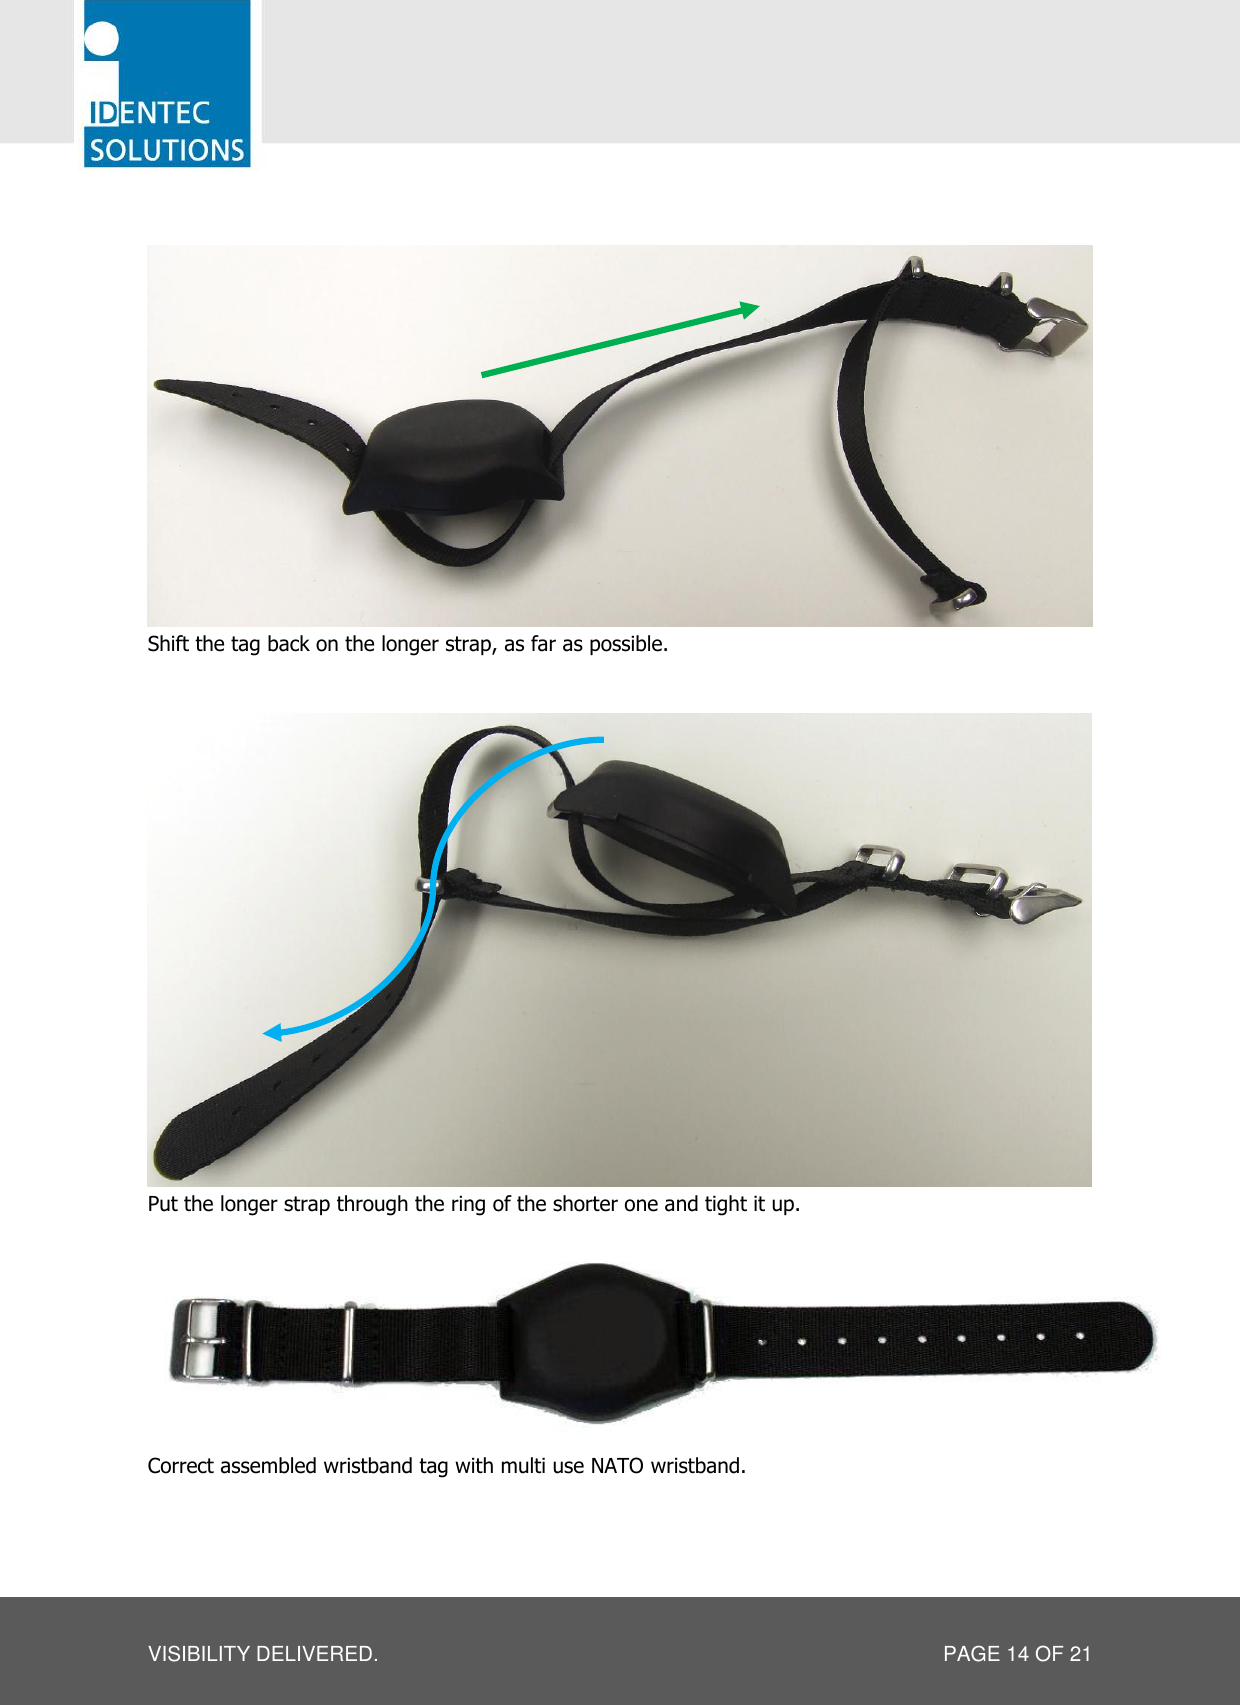   VISIBILITY DELIVERED.  PAGE 14 OF 21   Shift the tag back on the longer strap, as far as possible.    Put the longer strap through the ring of the shorter one and tight it up.   Correct assembled wristband tag with multi use NATO wristband. 